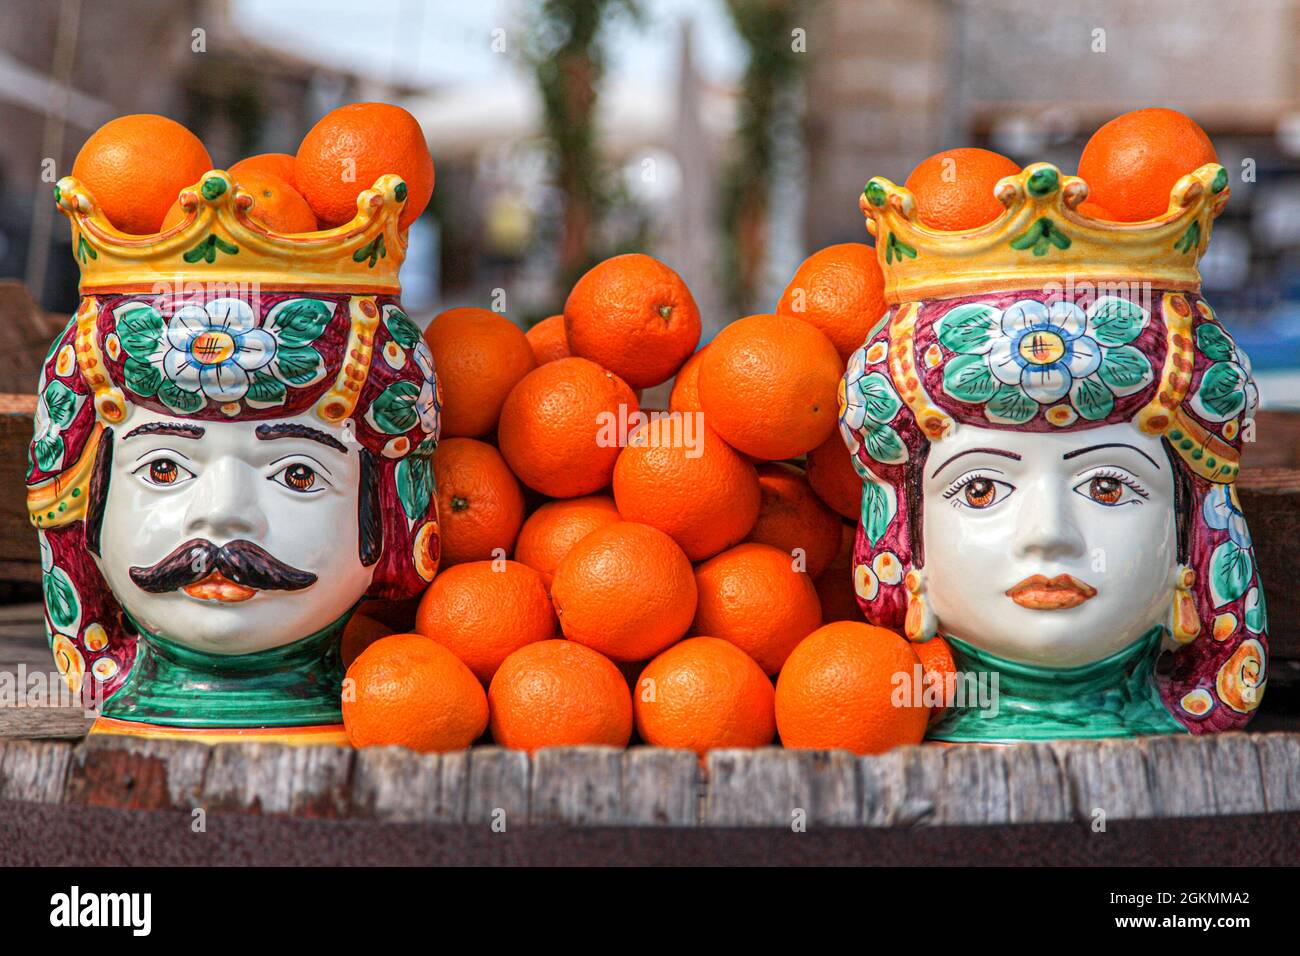 traditional Sicilian ceramic heads with oranges Stock Photo